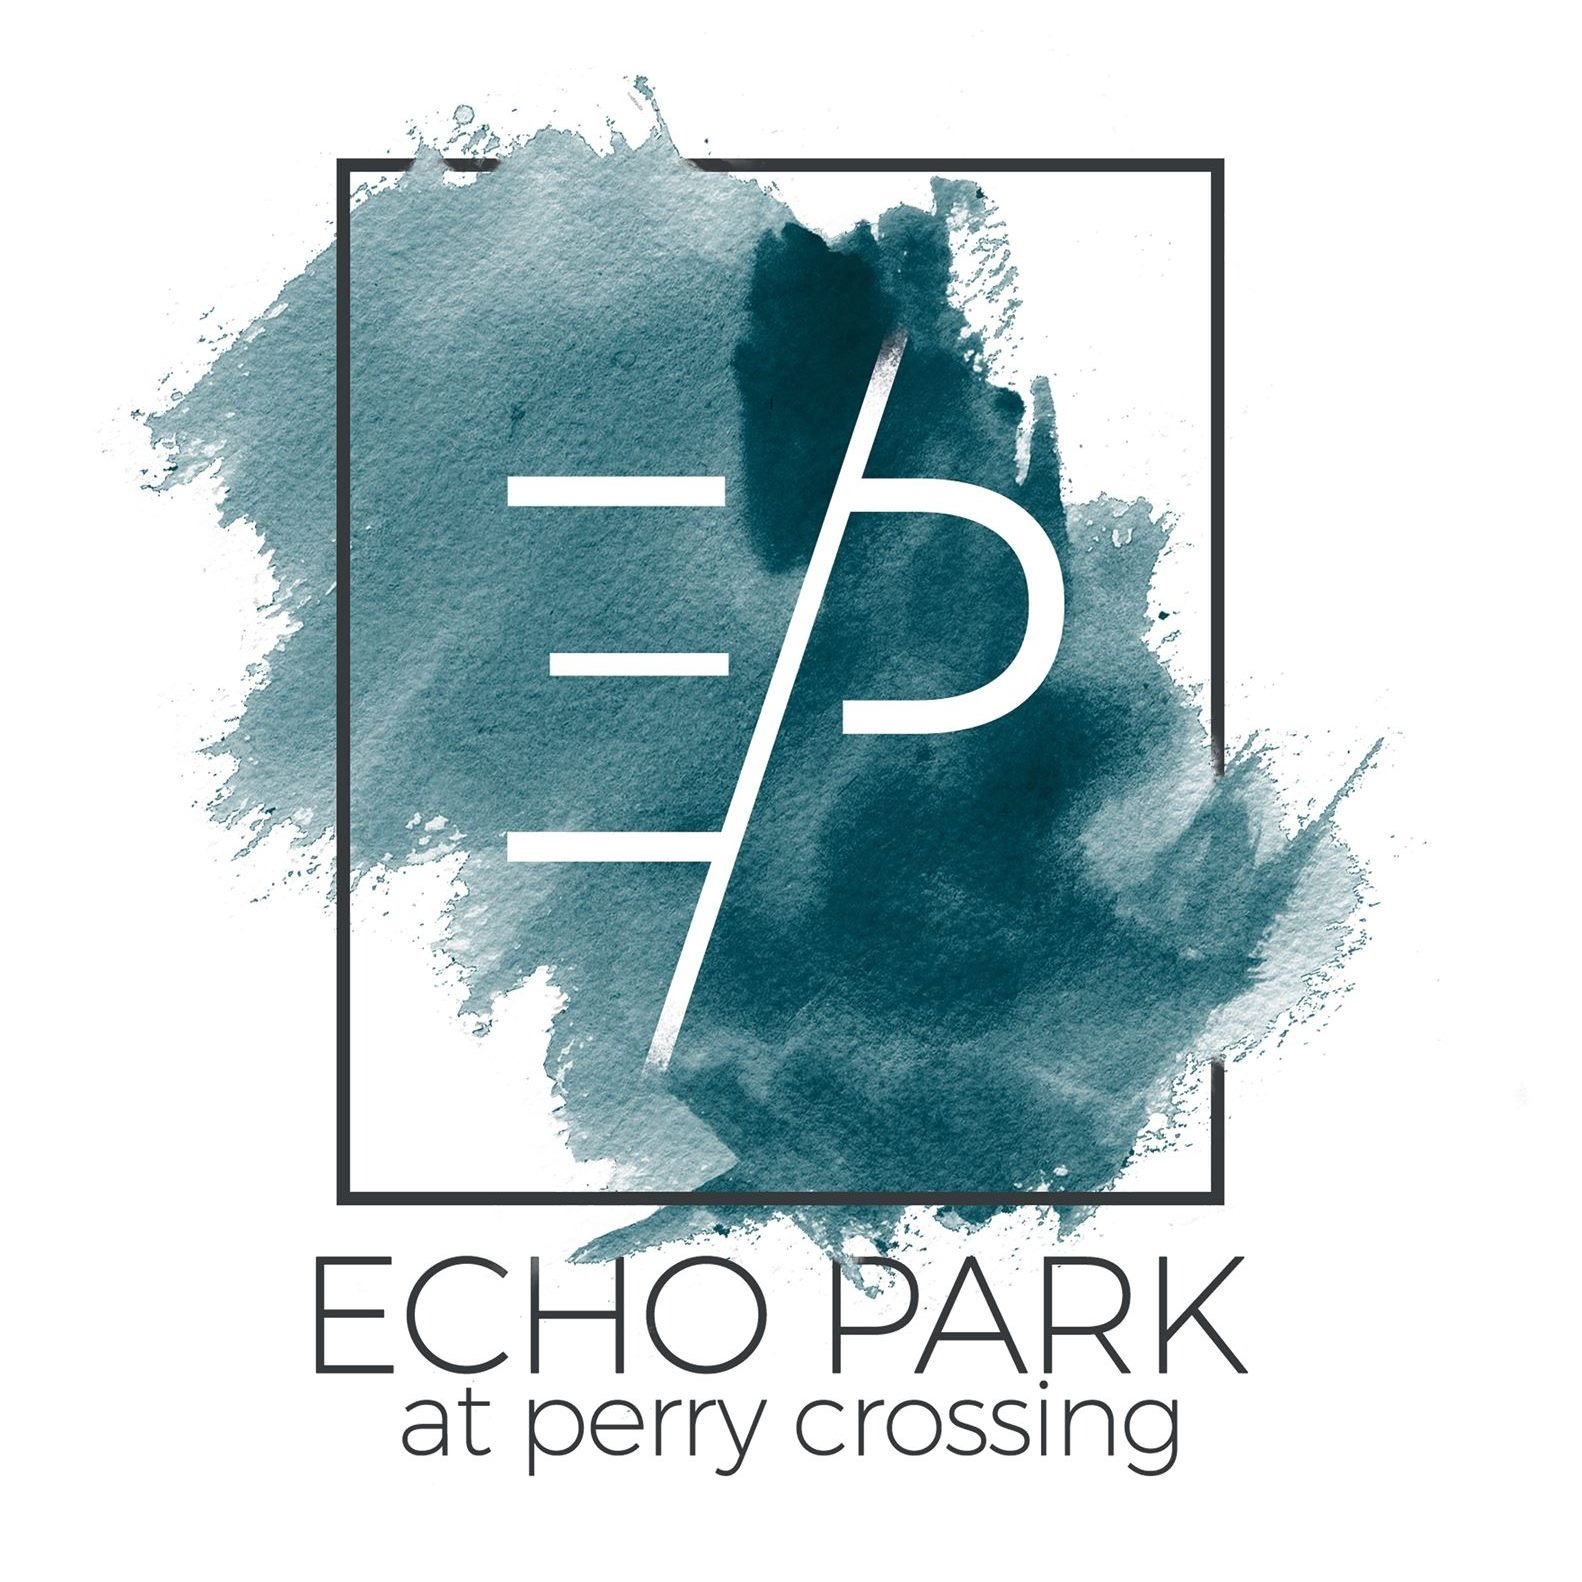 Echo Park at Perry Crossing